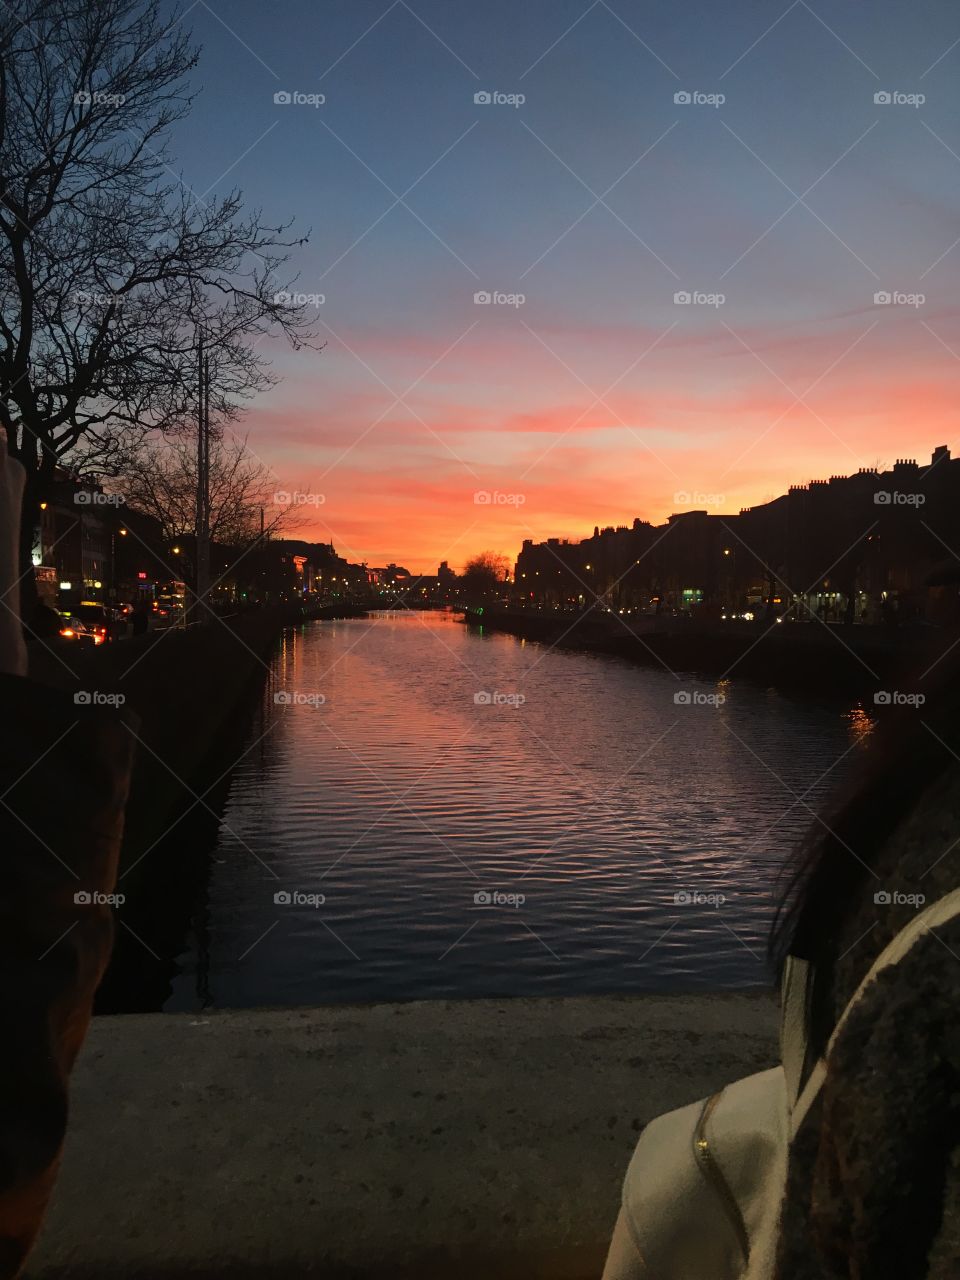 Sunset in Dublin is an amazing sight. 